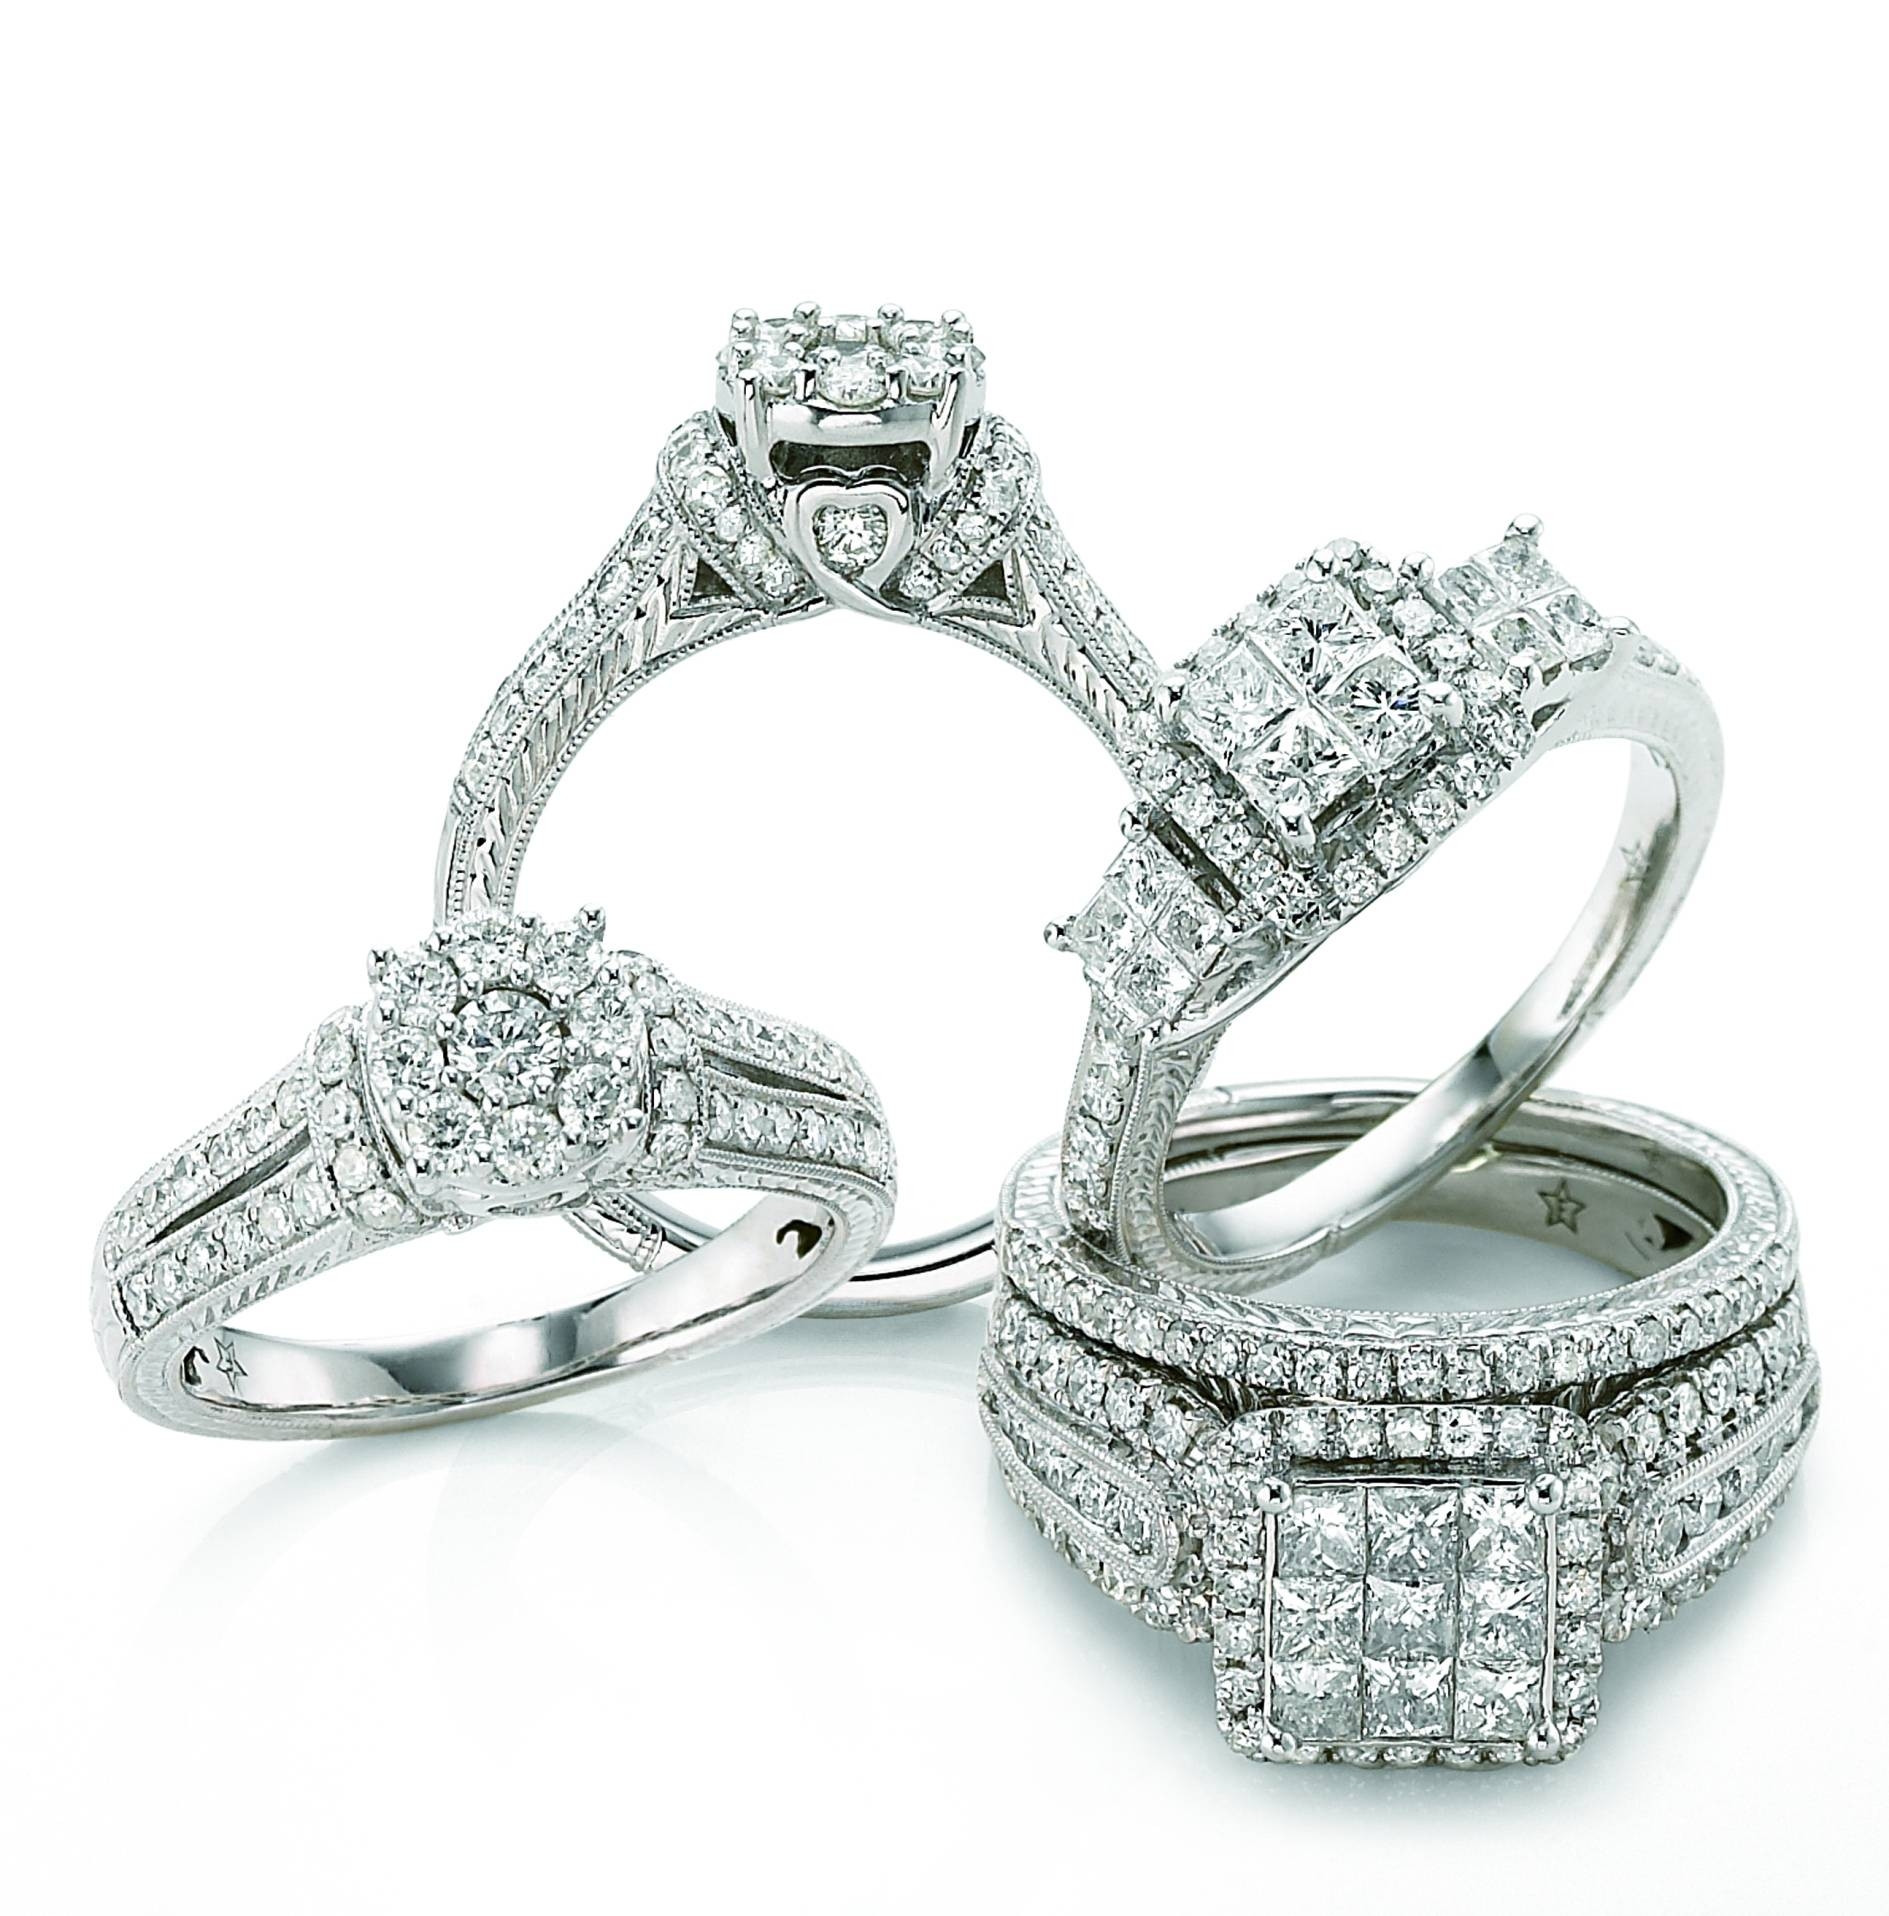 Jcpenney Diamond Engagement Rings
 15 Best Collection of Jcpenney Jewelry Wedding Bands